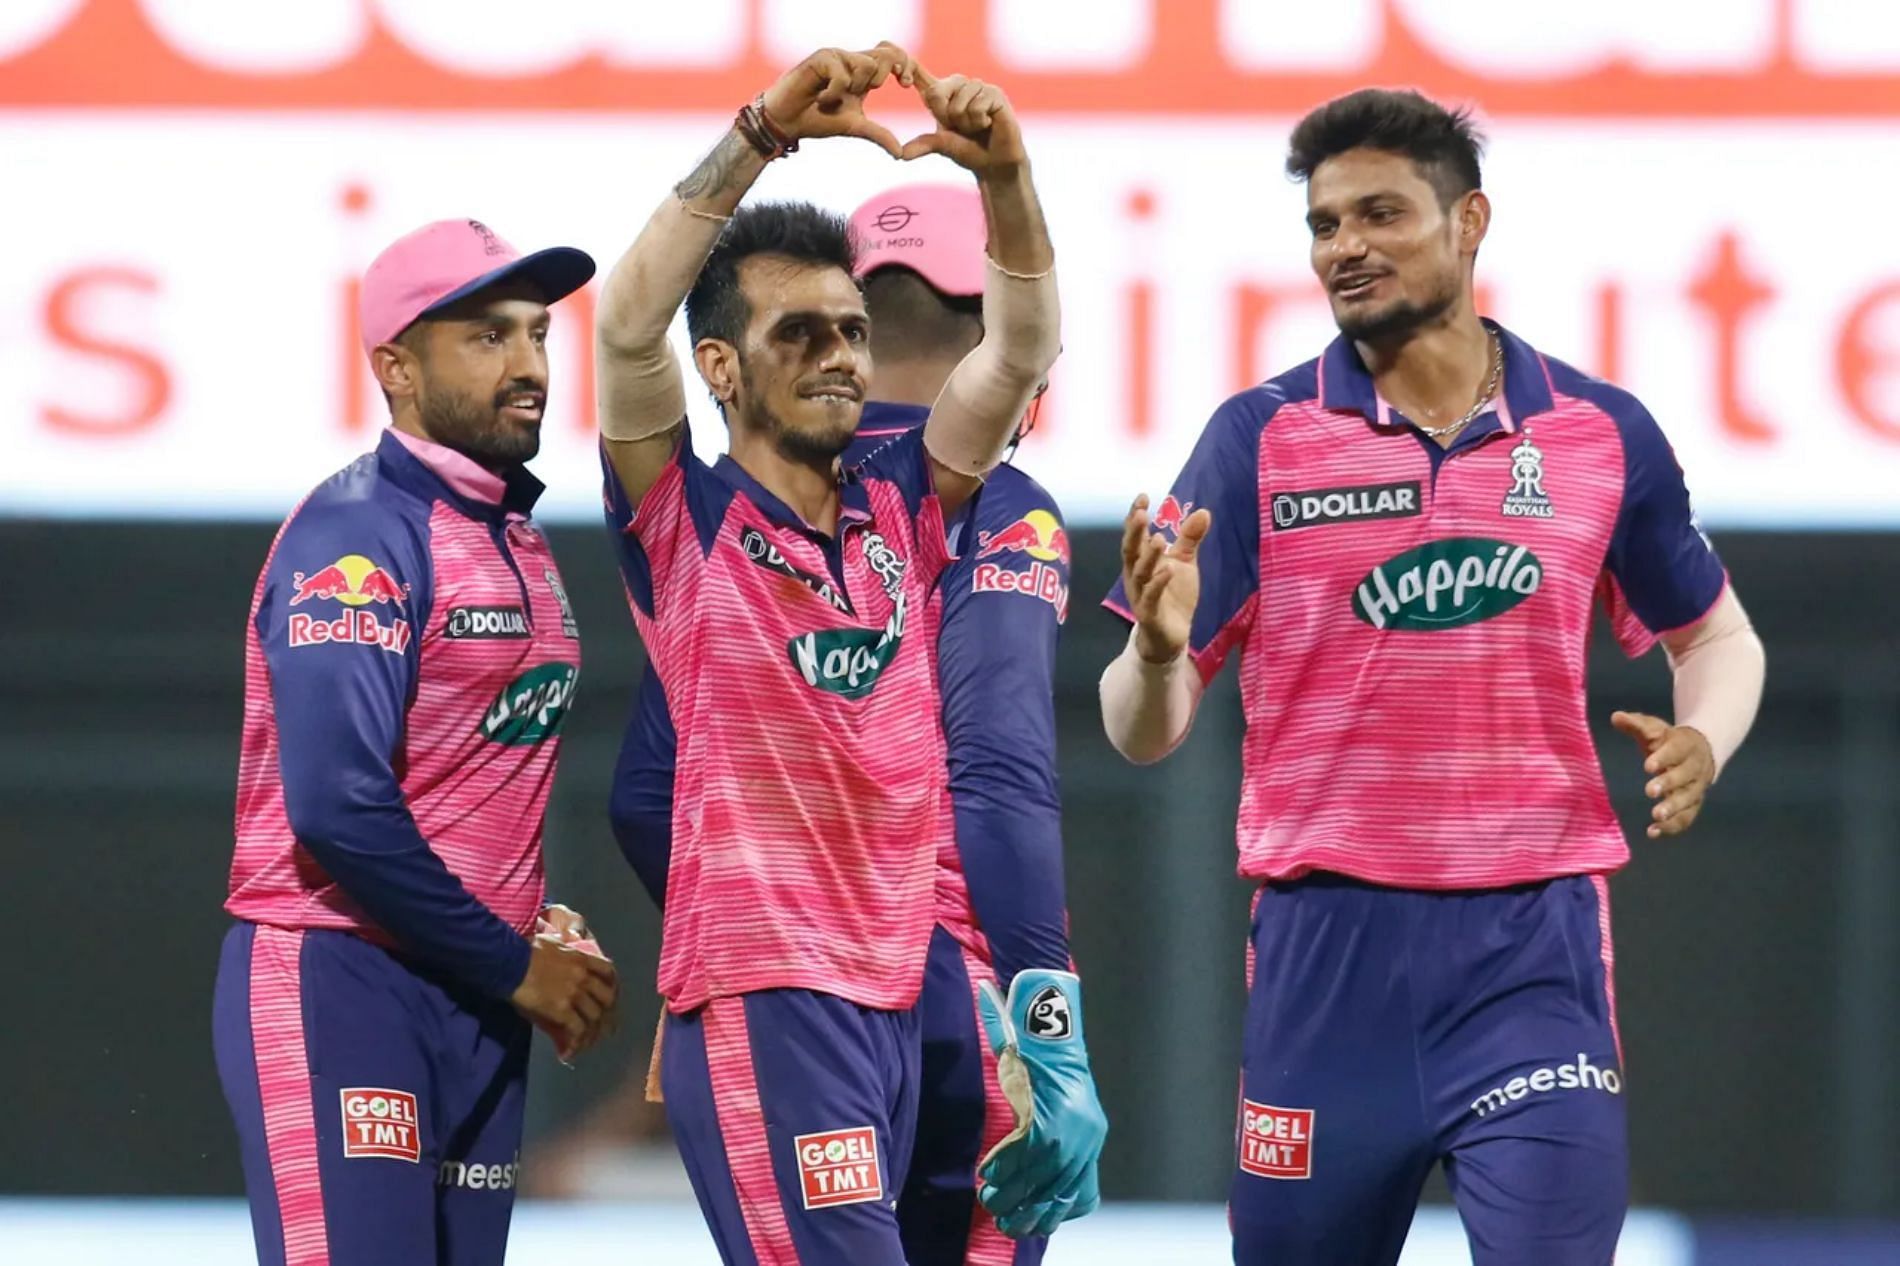 Kuldeep Yadav (right) with RR players during the match on Monday. Pic: IPLT20.COM